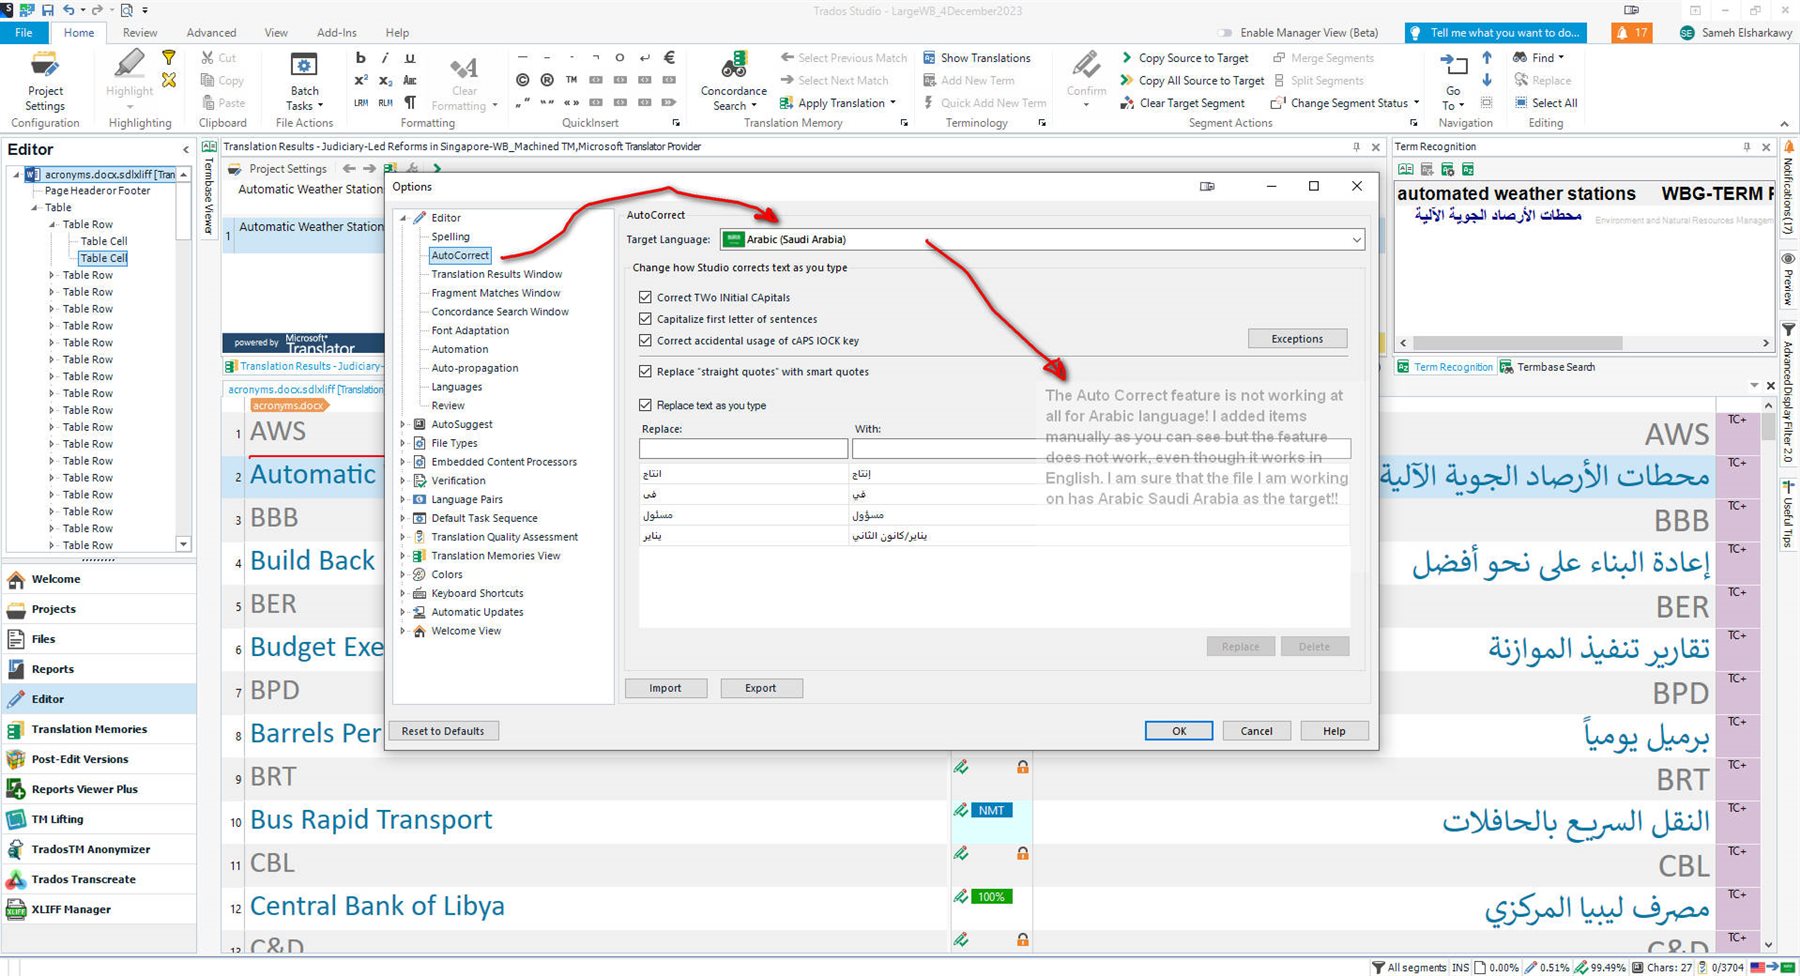 Screenshot of Trados Studio with the AutoCorrect settings window open for Arabic (Saudi Arabia) and a note explaining the AutoCorrect feature is not working for Arabic language.